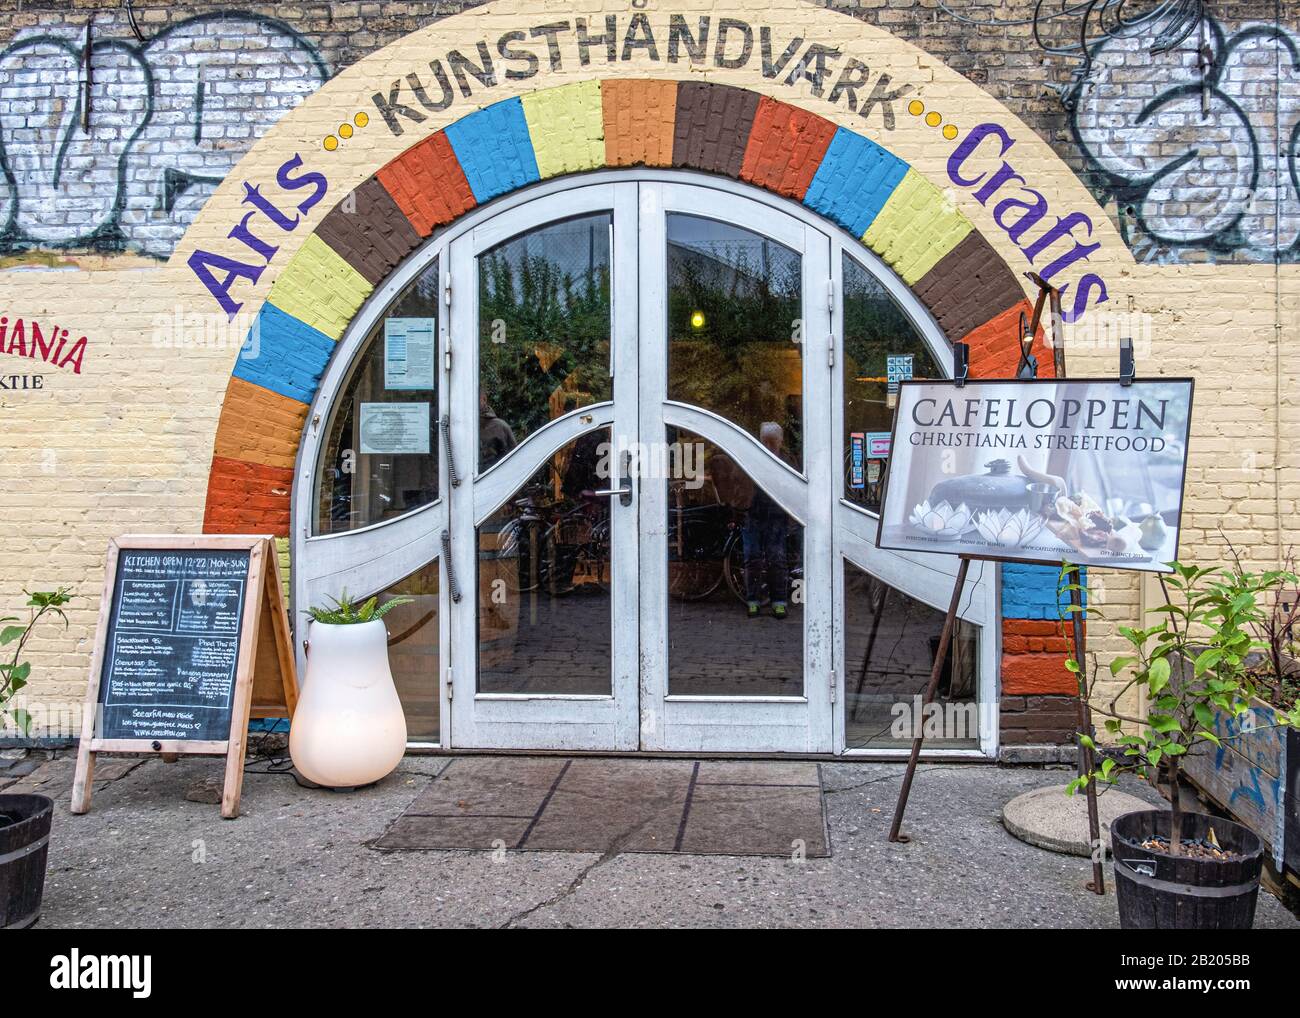 Cafe Loppen restaurant in Freetown Christiania, a hippie community and  anarchist commune established by squatters in Copenhagen,Denmark Stock  Photo - Alamy